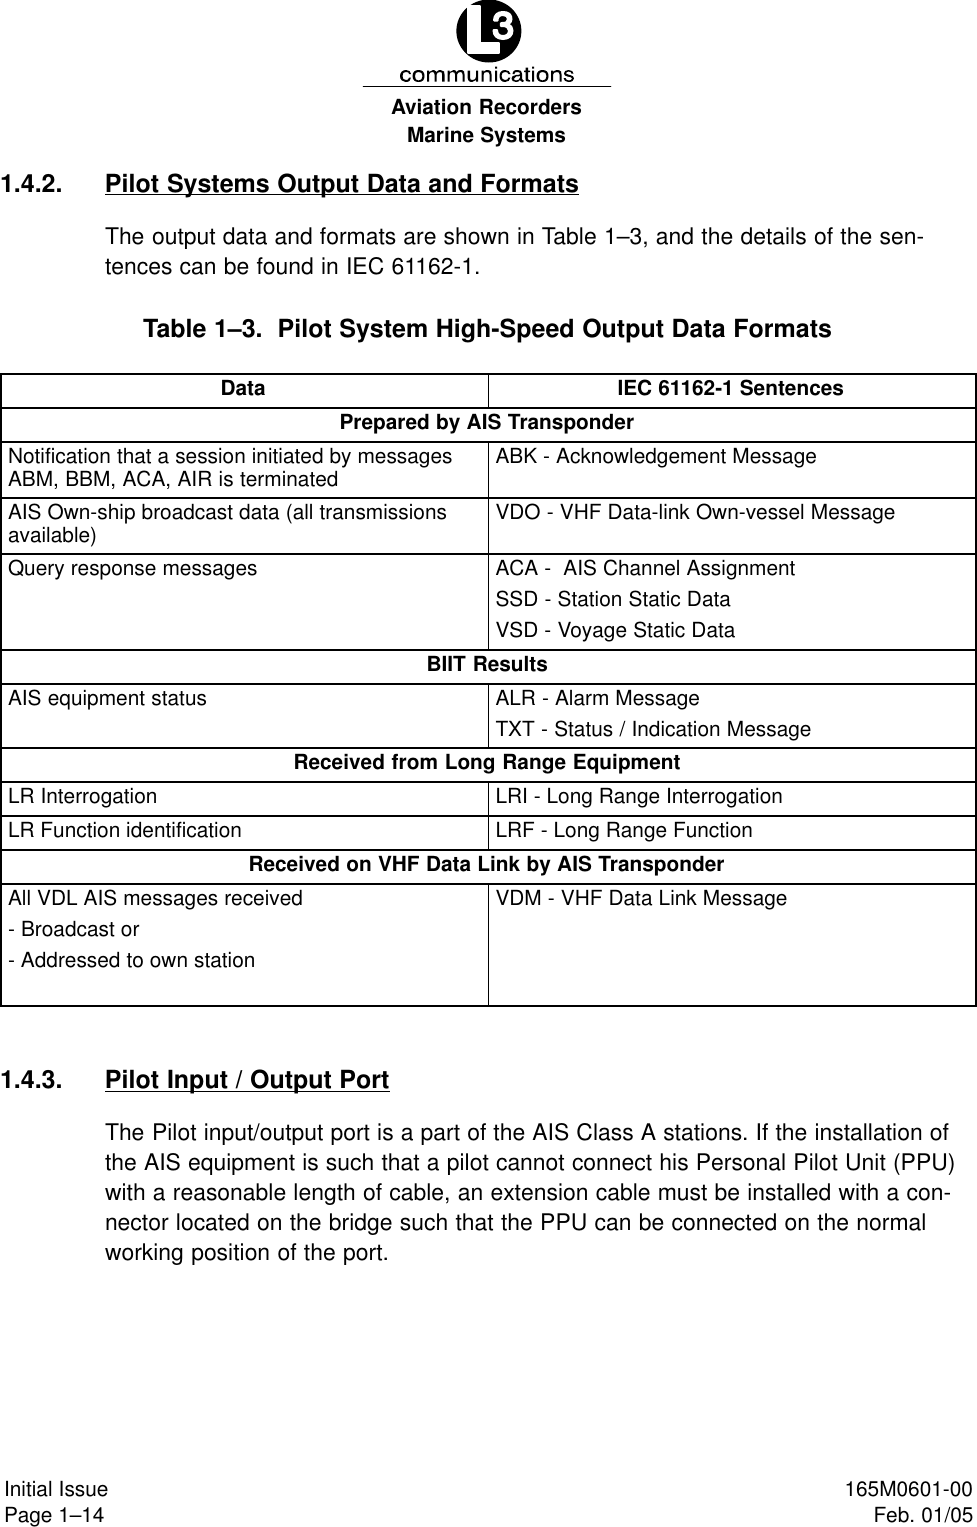 Marine SystemsAviation RecordersPage 1–14Initial Issue 165M0601-00Feb. 01/051.4.2. Pilot Systems Output Data and FormatsThe output data and formats are shown in Table 1–3, and the details of the sen-tences can be found in IEC 61162-1.Table 1–3.  Pilot System High-Speed Output Data FormatsData IEC 61162-1 SentencesPrepared by AIS TransponderNotification that a session initiated by messagesABM, BBM, ACA, AIR is terminated ABK - Acknowledgement MessageAIS Own-ship broadcast data (all transmissionsavailable) VDO - VHF Data-link Own-vessel MessageQuery response messages ACA -  AIS Channel AssignmentSSD - Station Static DataVSD - Voyage Static DataBIIT ResultsAIS equipment status ALR - Alarm MessageTXT - Status / Indication MessageReceived from Long Range EquipmentLR Interrogation LRI - Long Range InterrogationLR Function identification LRF - Long Range FunctionReceived on VHF Data Link by AIS TransponderAll VDL AIS messages received- Broadcast or- Addressed to own stationVDM - VHF Data Link Message1.4.3. Pilot Input / Output PortThe Pilot input/output port is a part of the AIS Class A stations. If the installation ofthe AIS equipment is such that a pilot cannot connect his Personal Pilot Unit (PPU)with a reasonable length of cable, an extension cable must be installed with a con-nector located on the bridge such that the PPU can be connected on the normalworking position of the port.